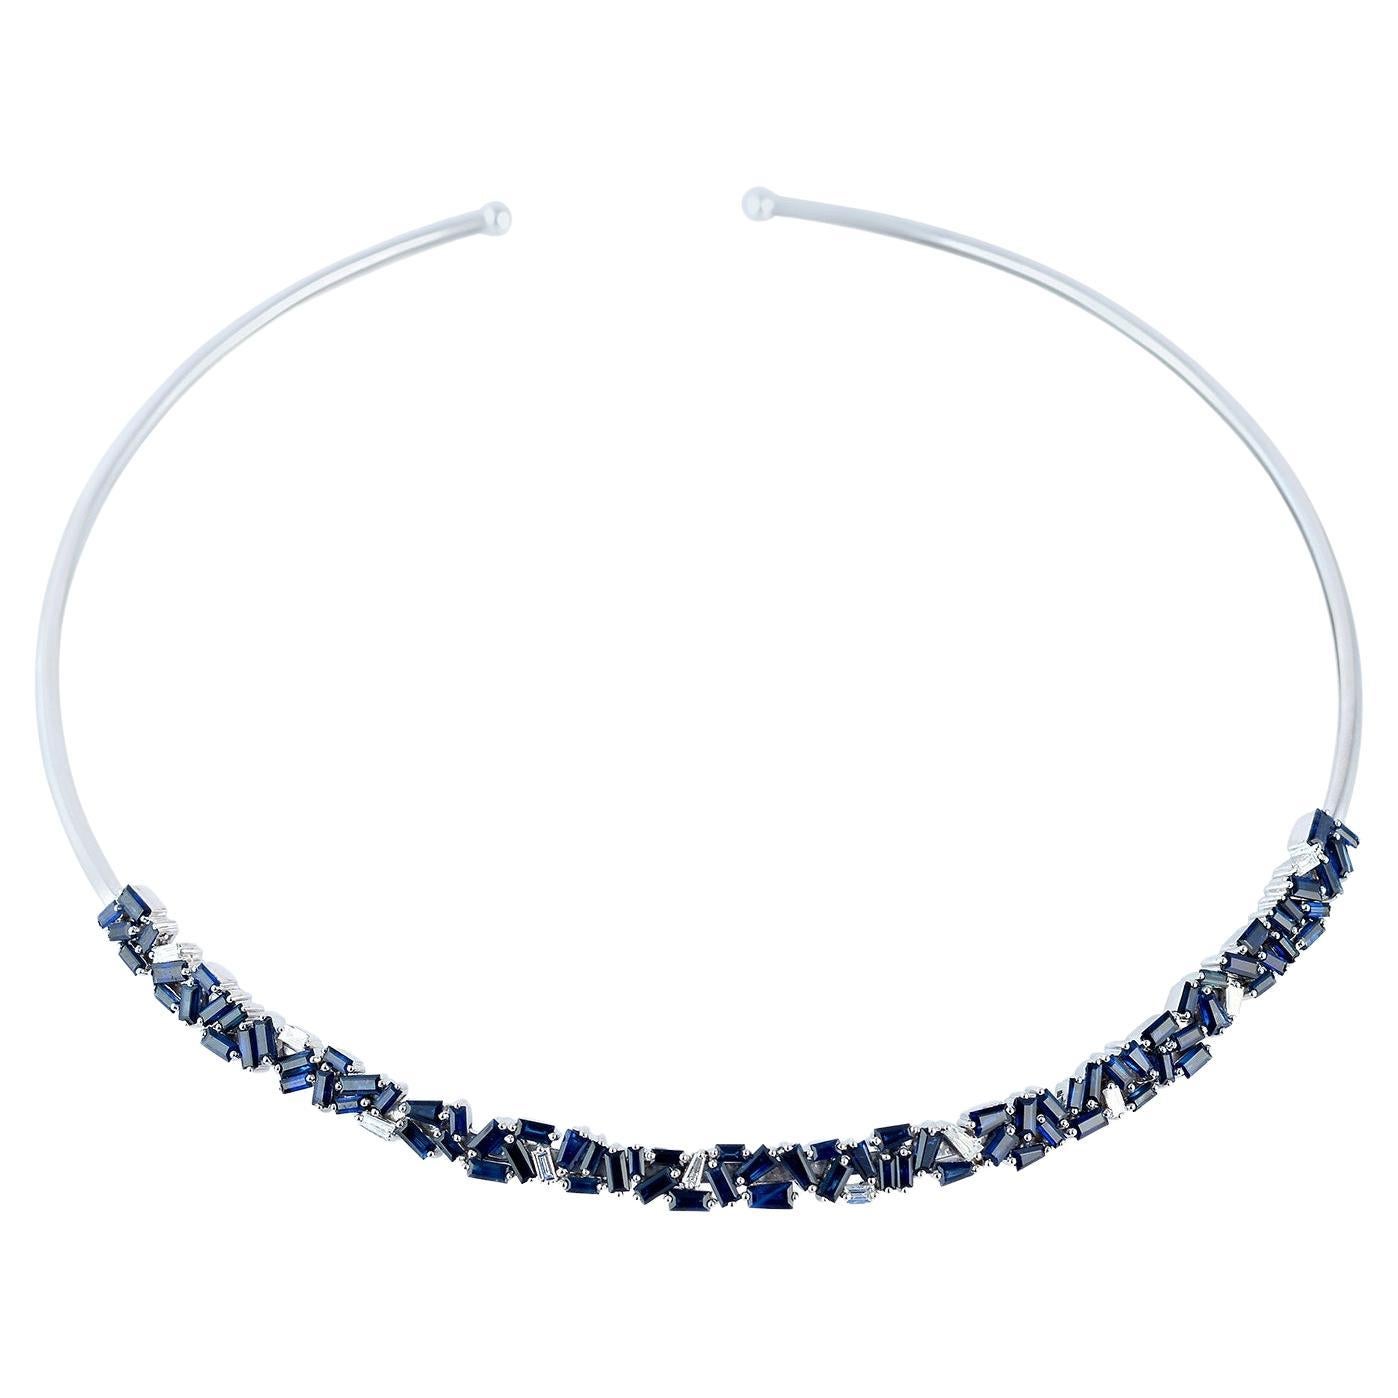 9.02 ct Baguette Shaped Blue Sapphire Choker Necklace Made In 18k White Gold For Sale